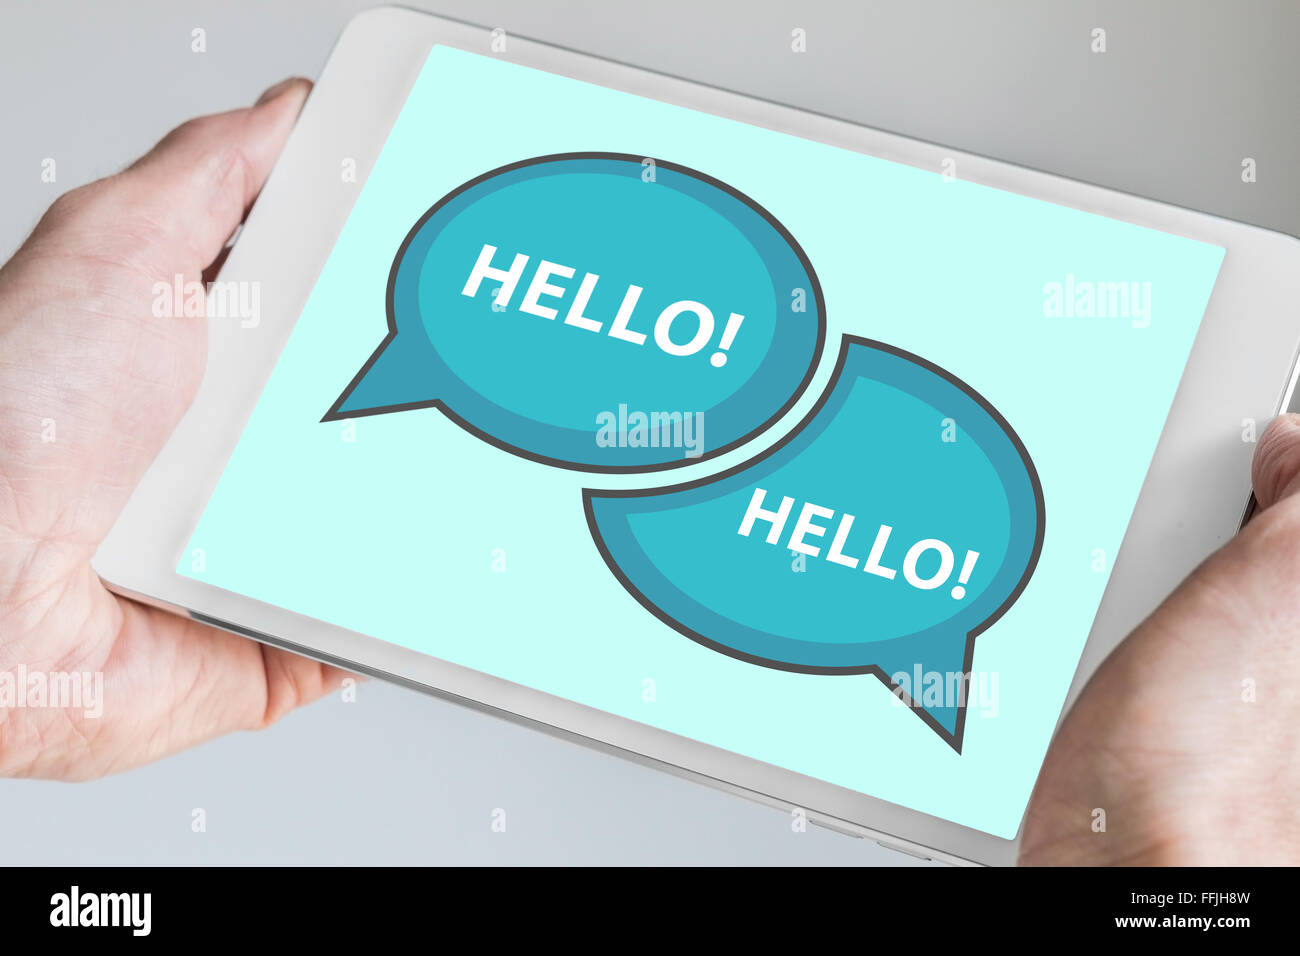 Greetings and business communication concept with speech bubble spelling out hello displayed on modern touch screen device Stock Photo